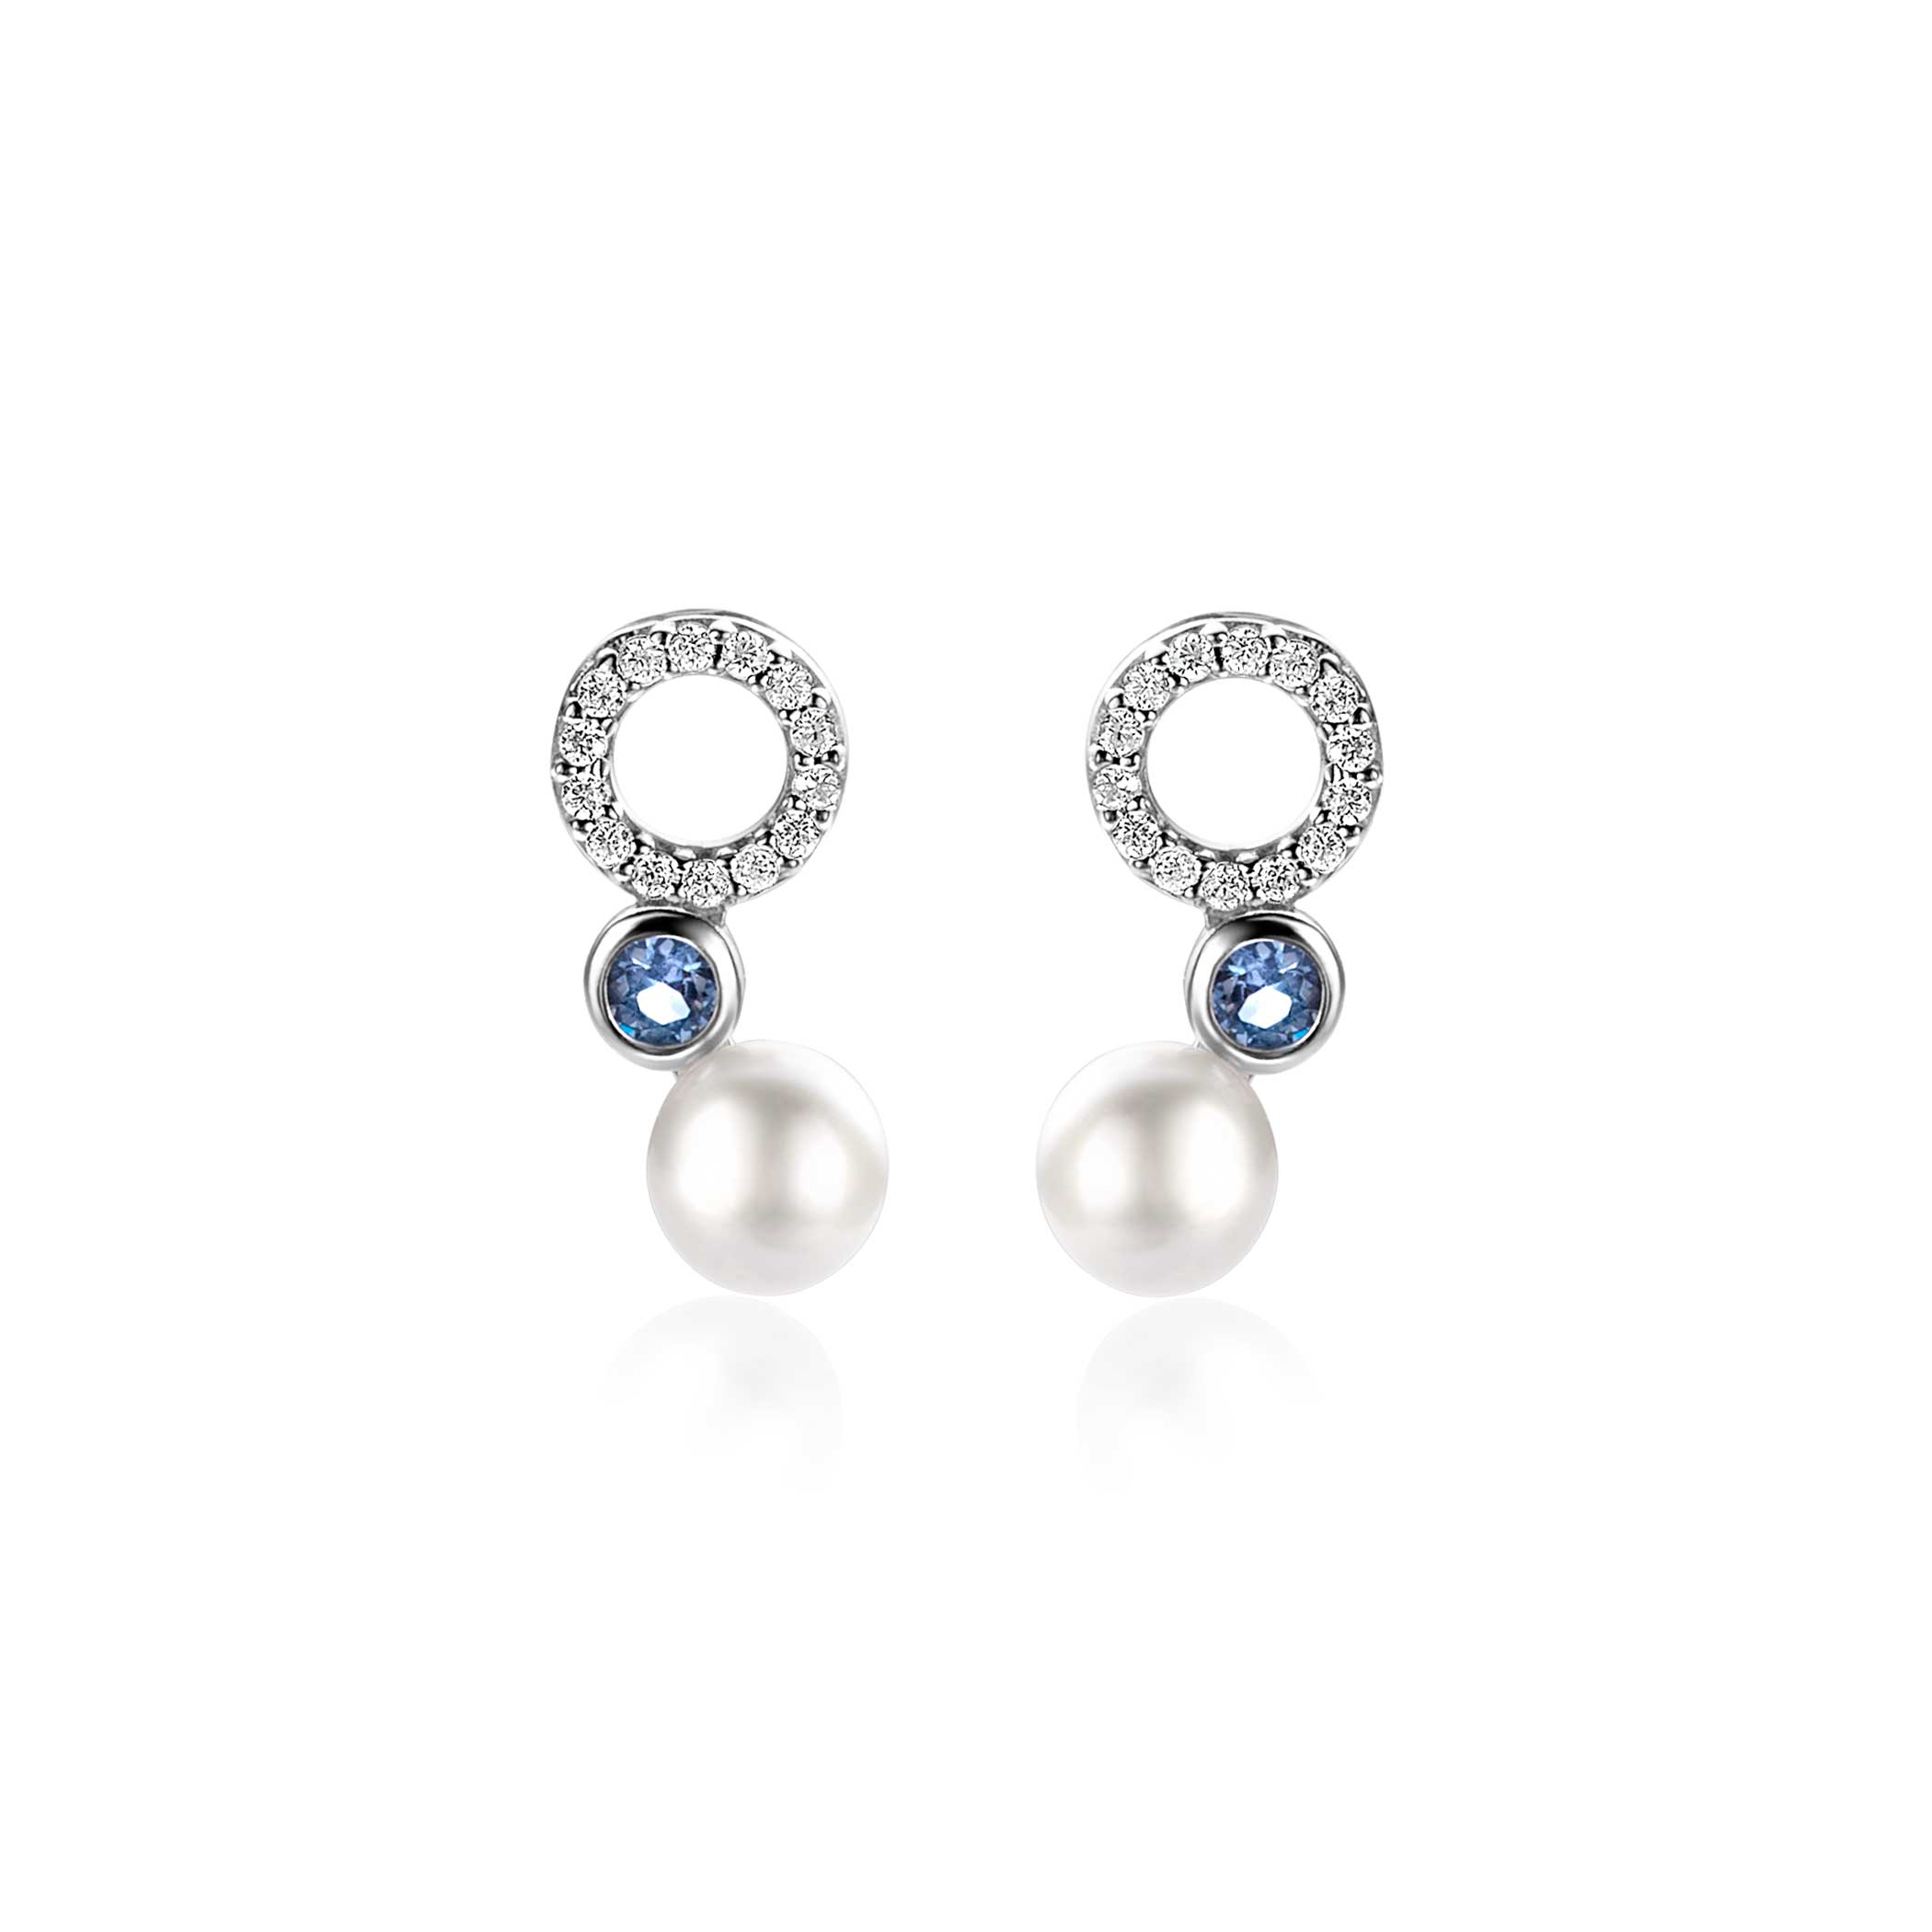 15mm ZINZI Sterling Silver Stud Earrings with White Pearl, Round Light Blue Color Stone and Open Circle White Zirconias ZIO2442